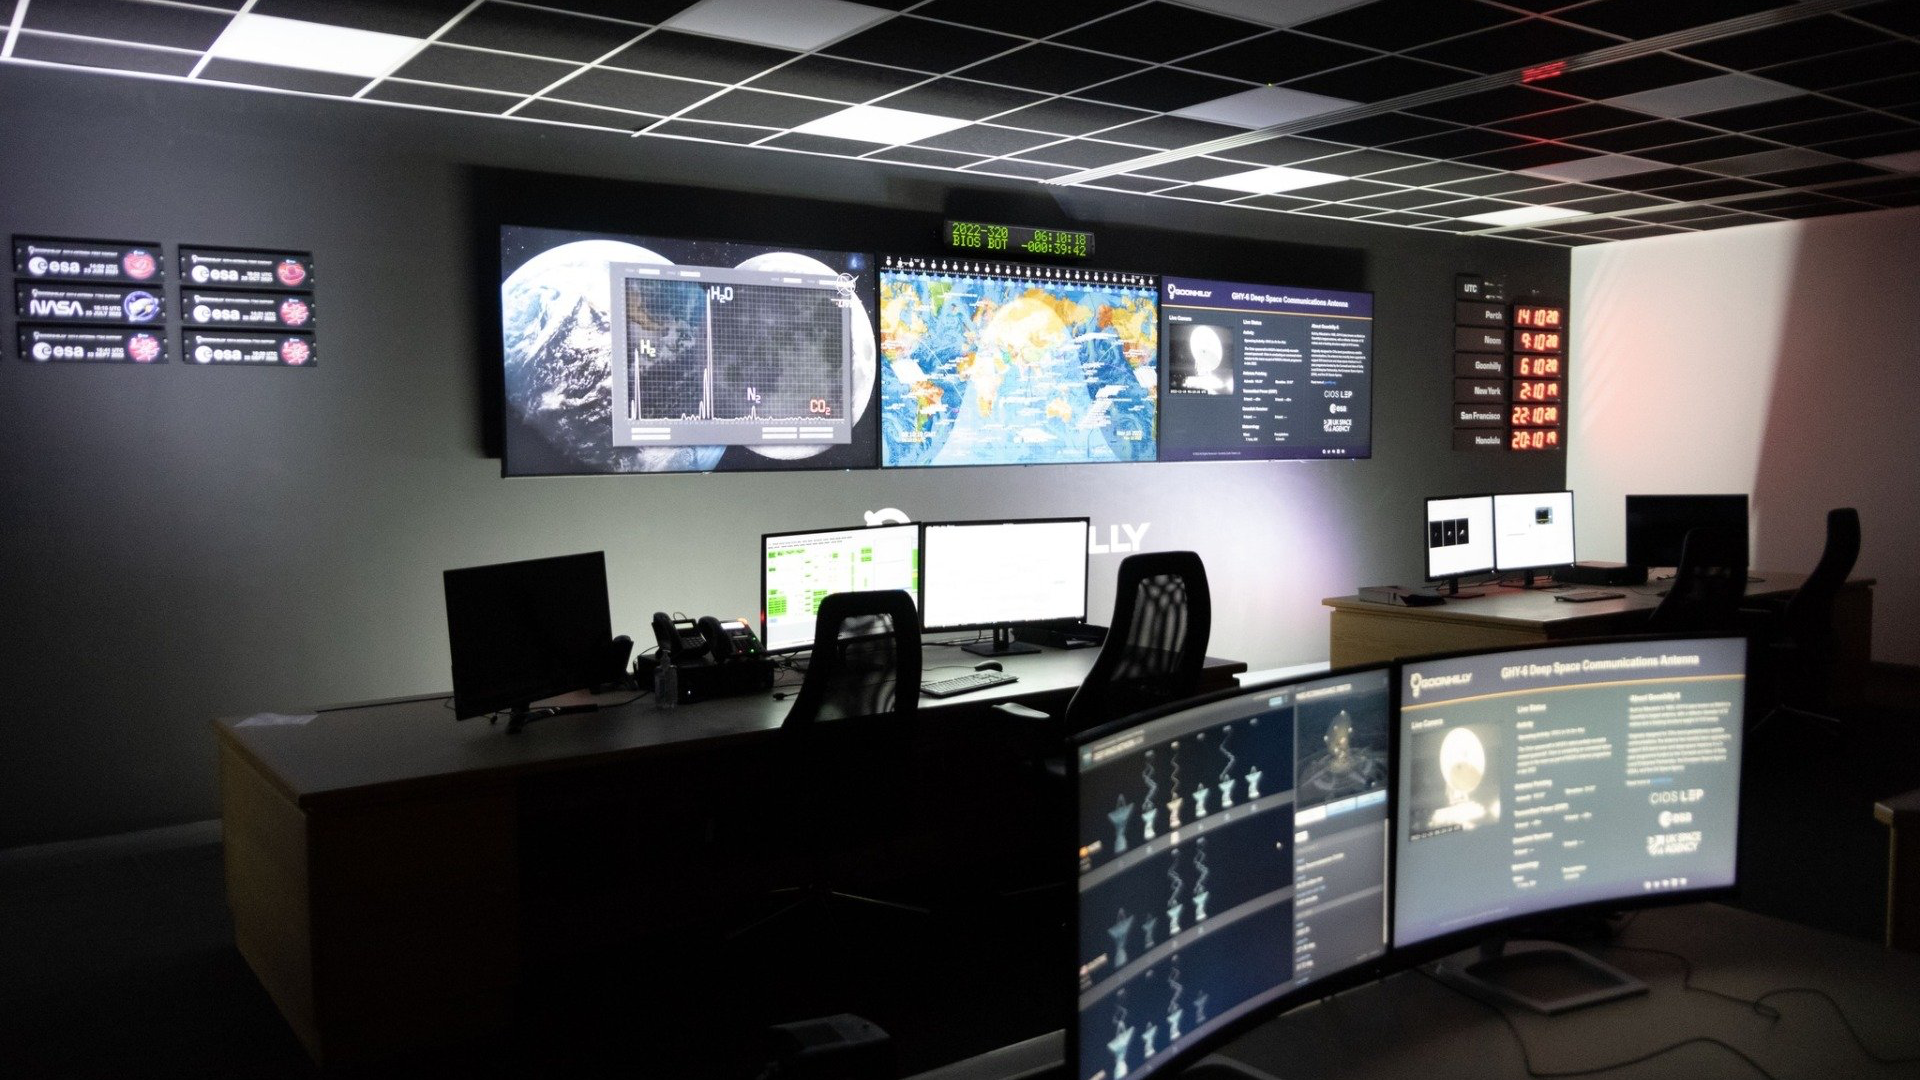 A picture of Goonhilly's Operational Control Centre (OCA) - the area in which the Deep Space Network Operations Team work. Large screens display information about lunar and deep space missions and computer stations are lit dramatically.